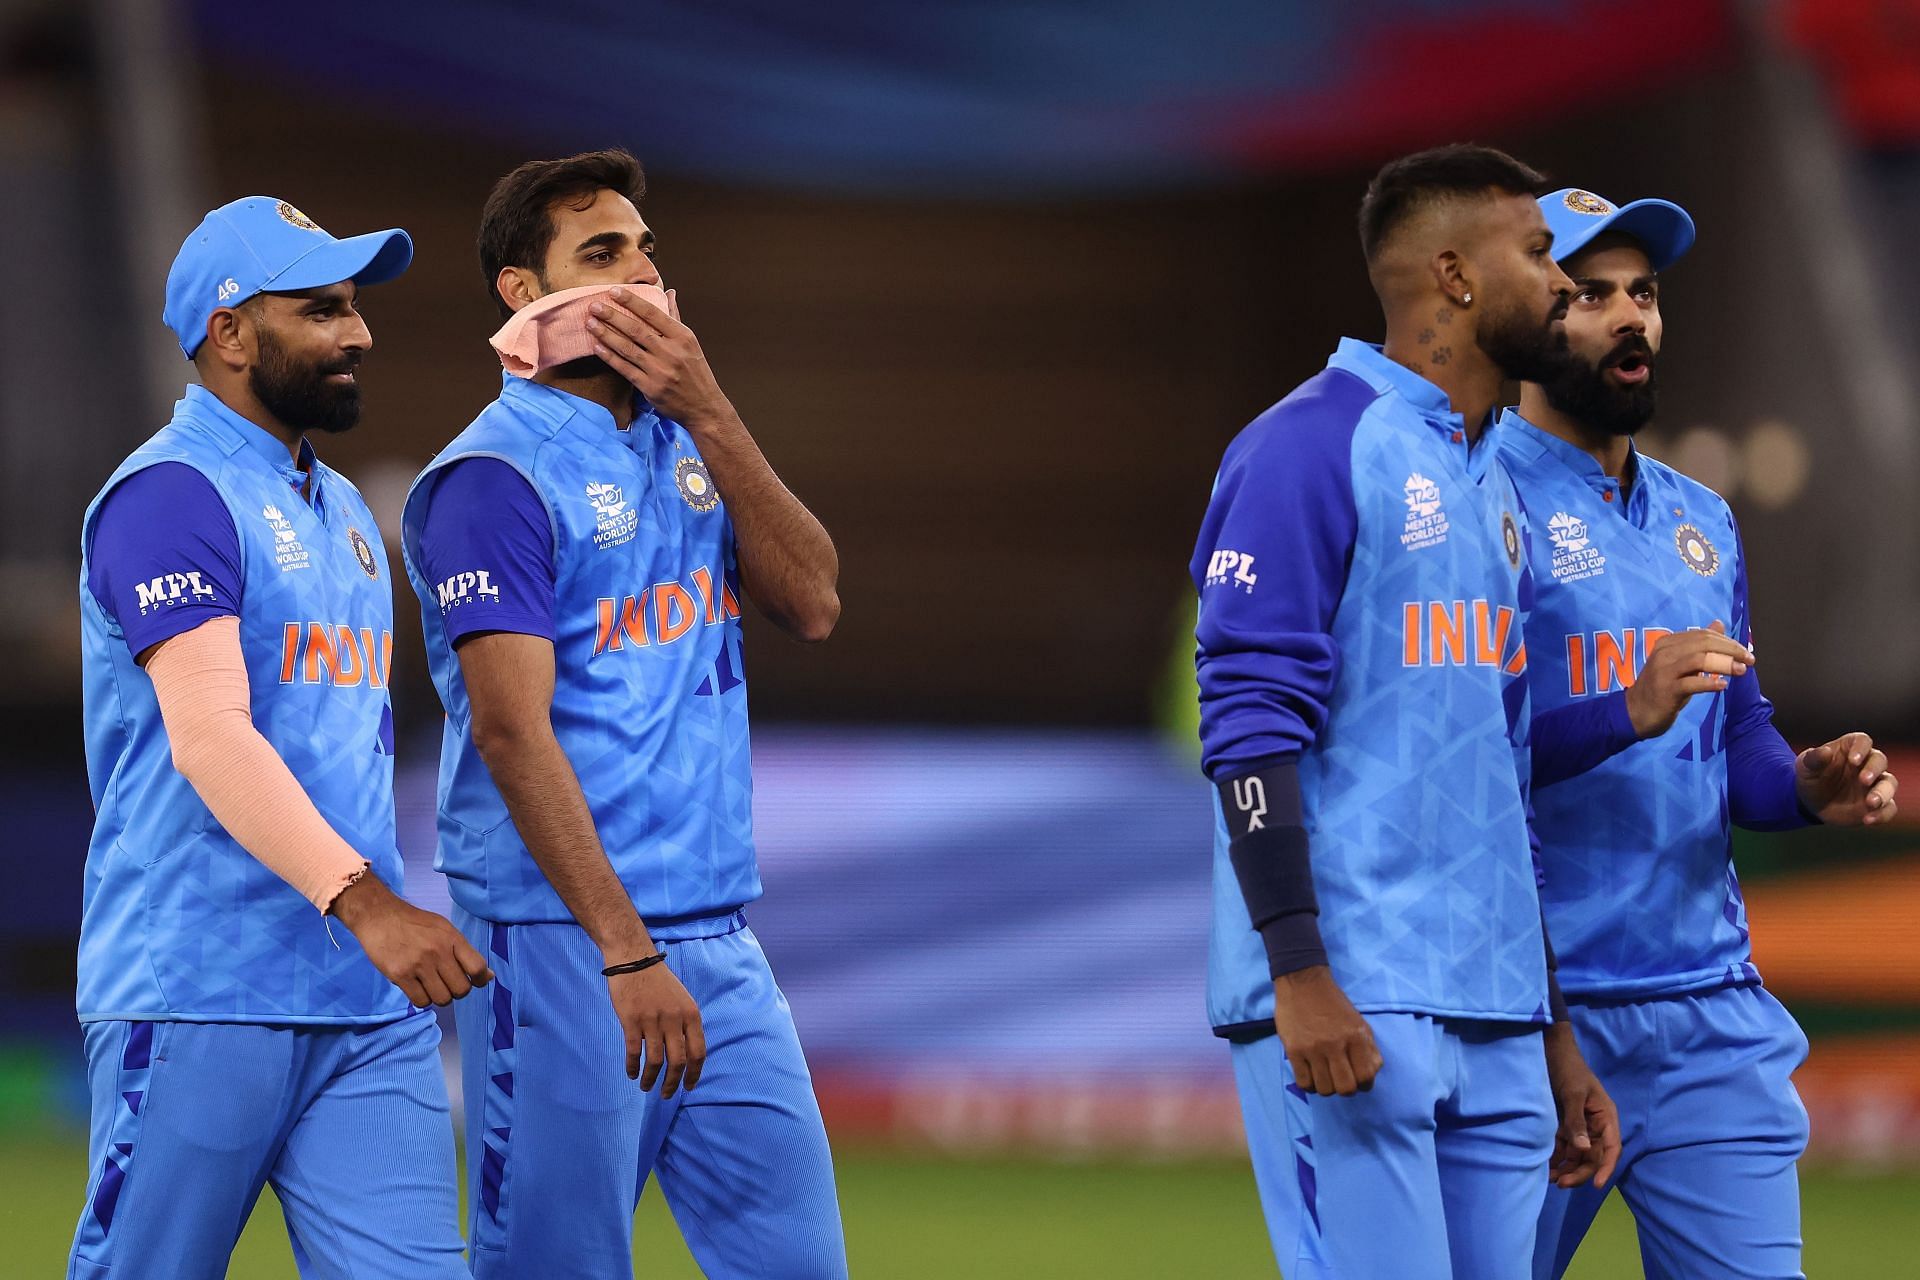 India vs Bangladesh T20 World Cup Probable XIs, pitch report, weather forecast, and live streaming details for Match 35